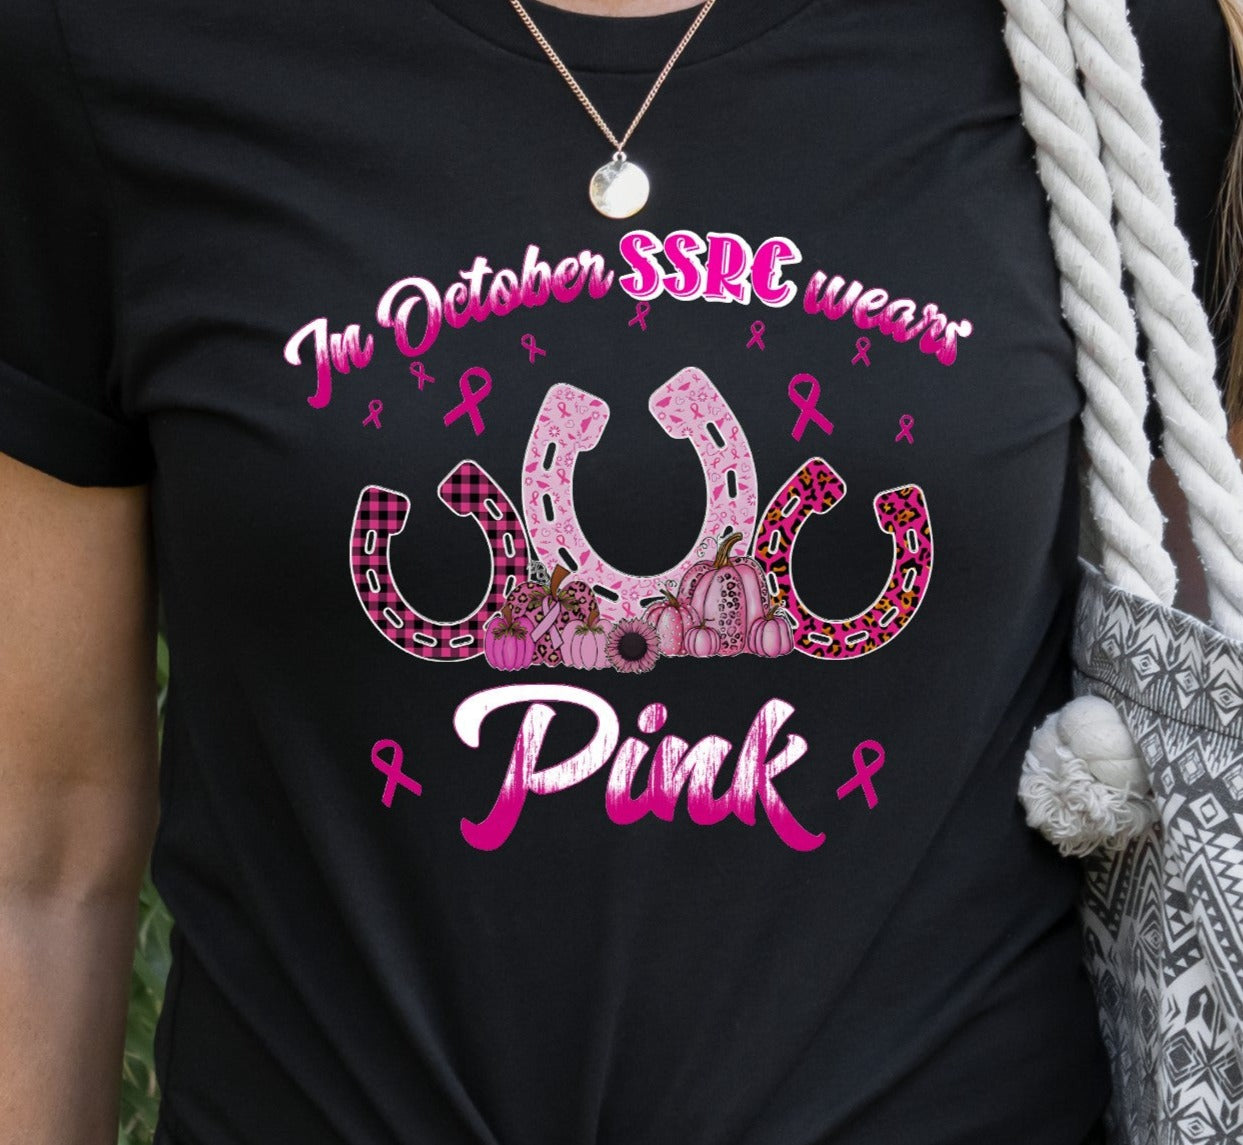 # Custom Product for Silver Spur Riding Club- In October SSRC wears Pink